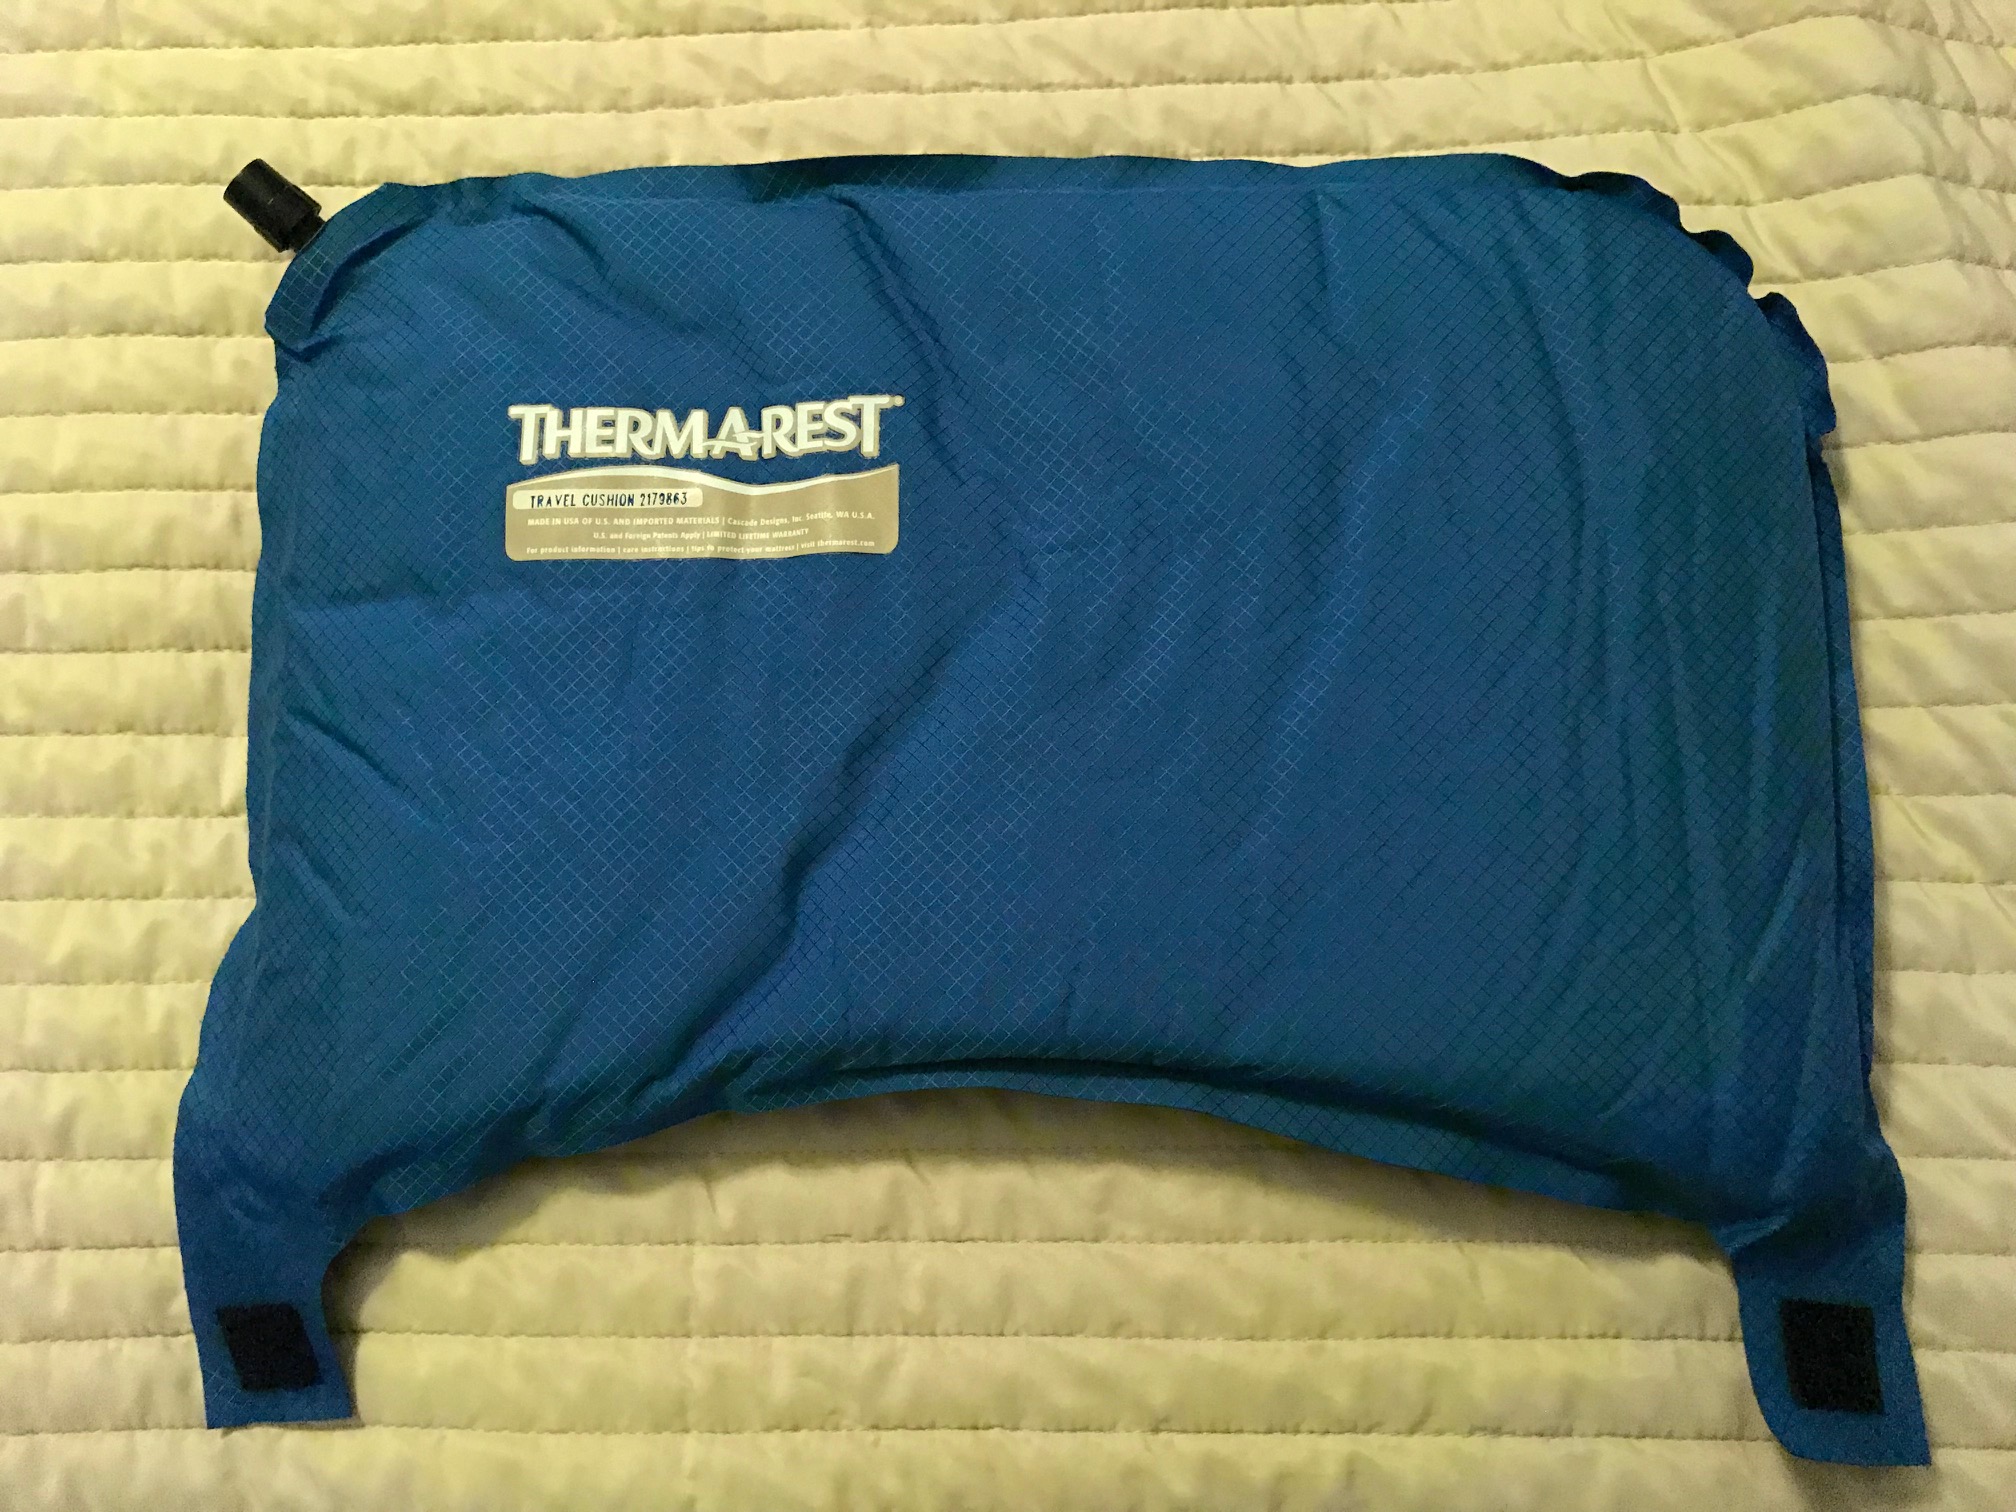 Therm-A-Rest Travel Cushion Review - Experience Using it on a 15 hour ...